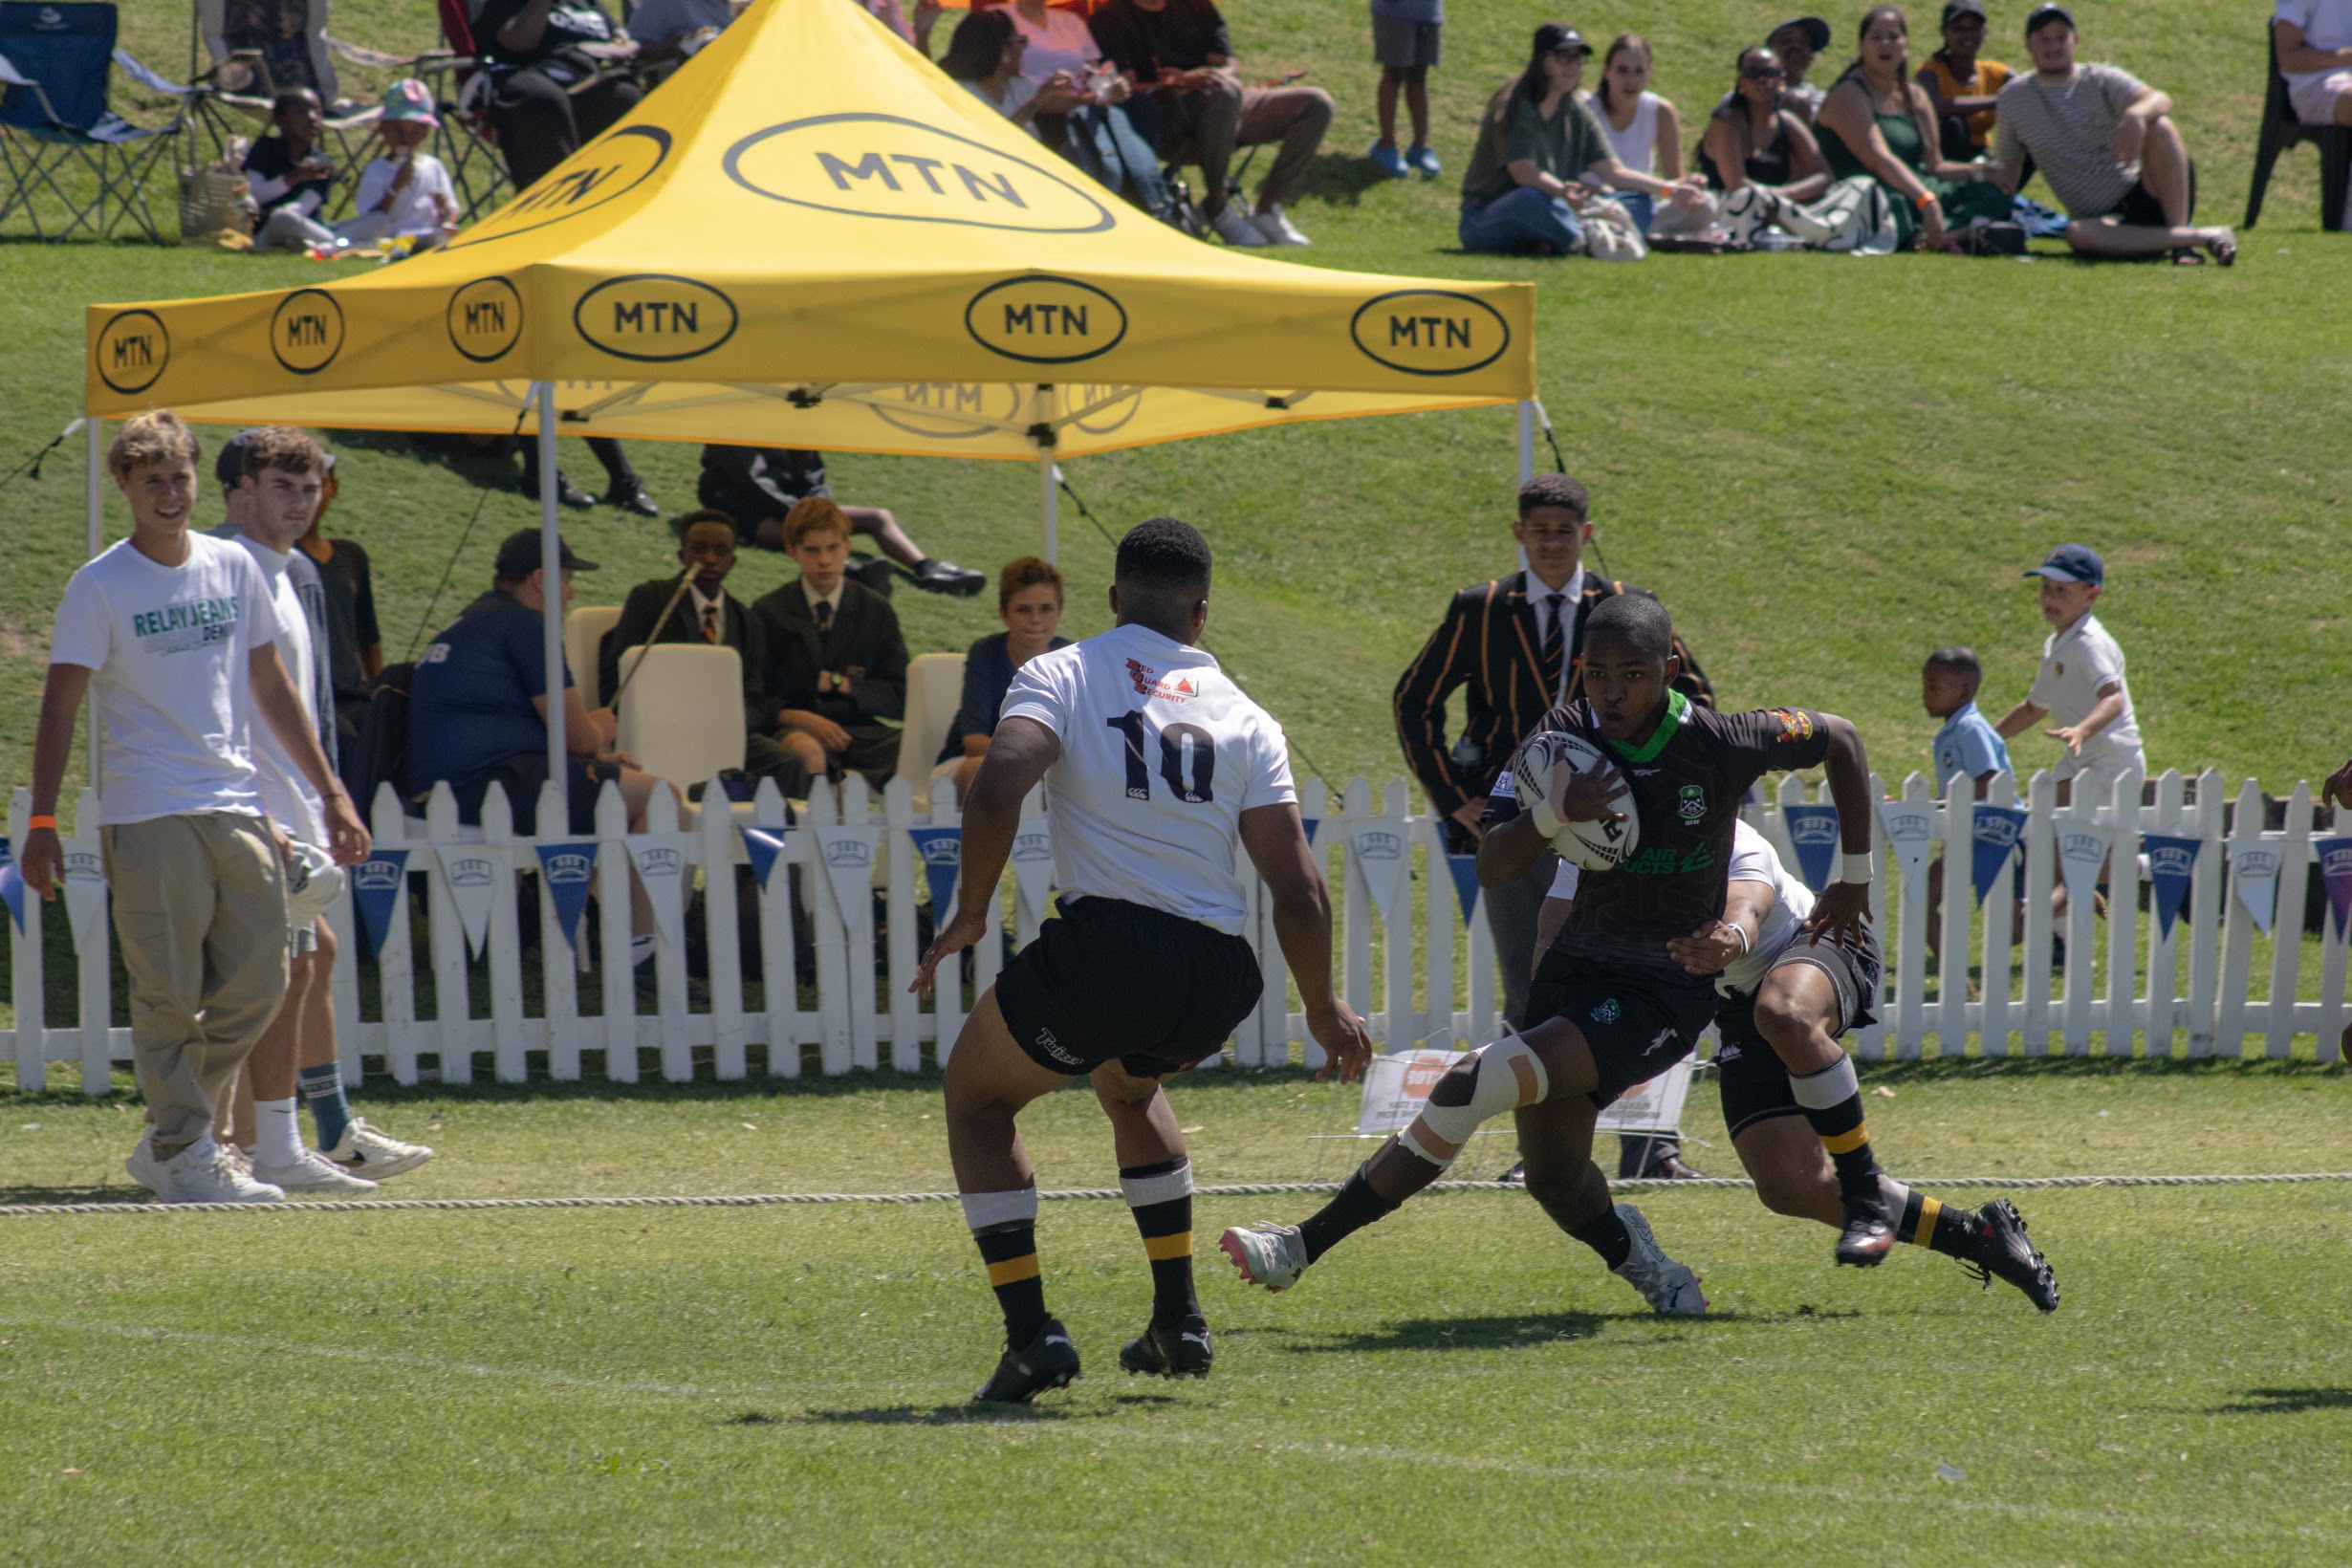 Queens College vs Pearsons High School at the Graeme College rugby festival. Photo: Rikie Lai